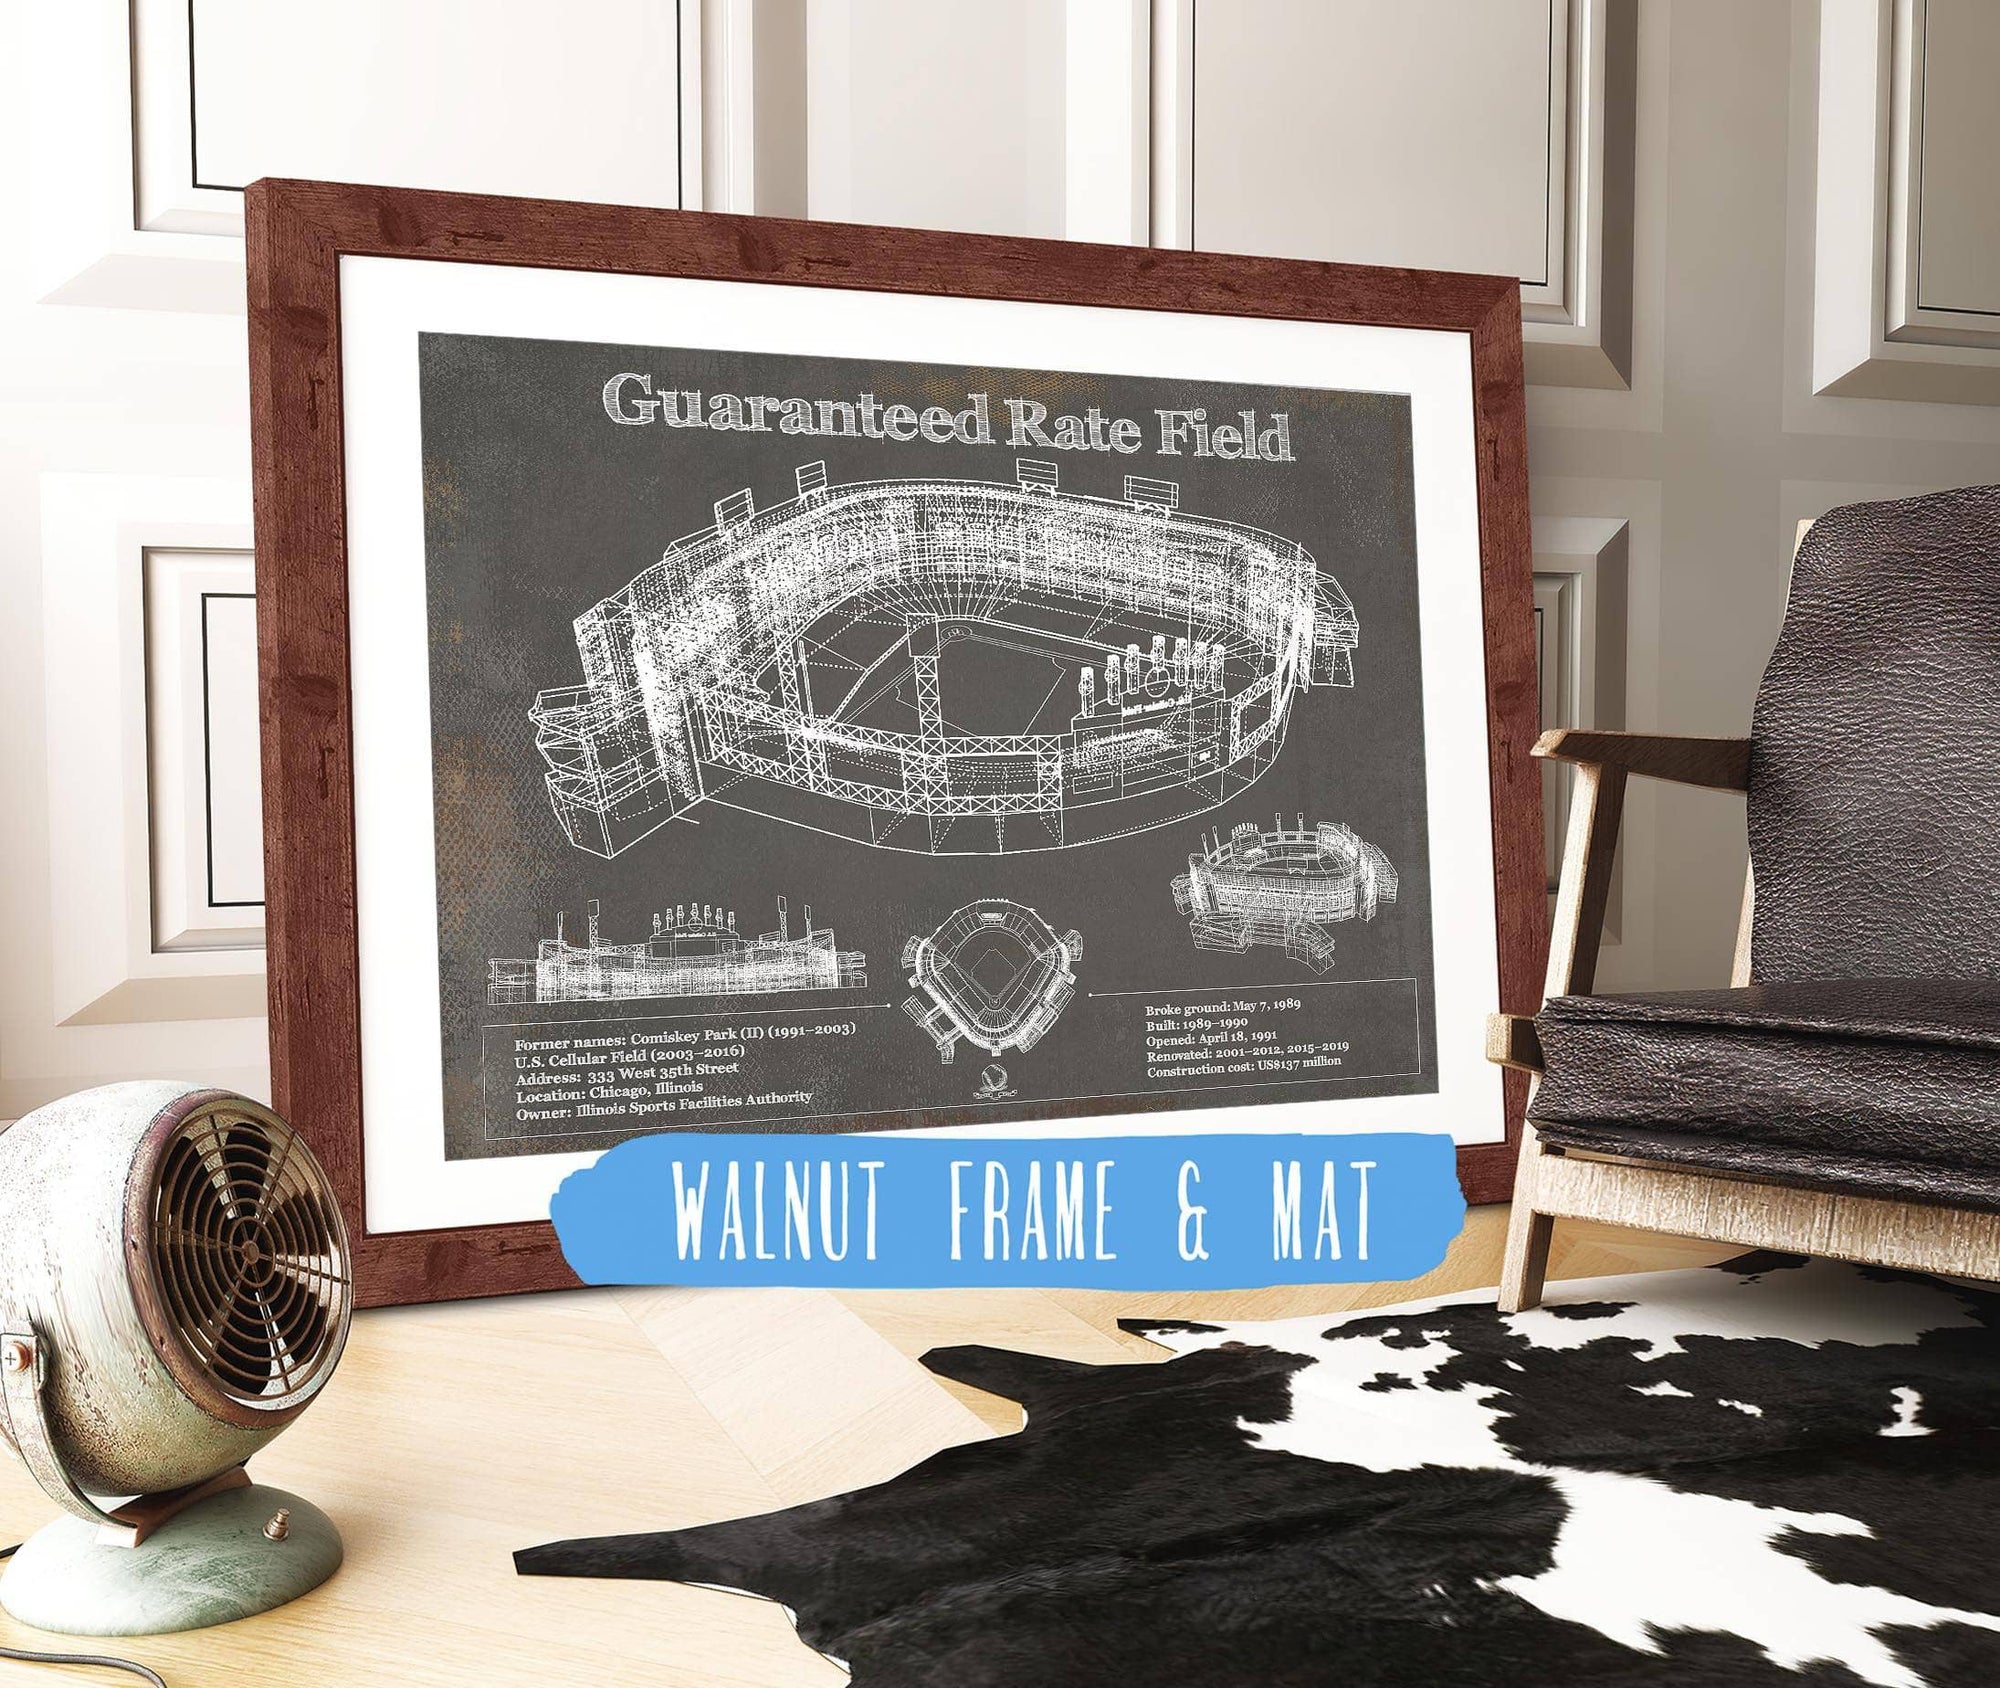 Cutler West Baseball Collection 14" x 11" / Walnut Frame & Mat Guaranteed Rate Field - Chicago White Sox Team Color Vintage Baseball Fan Print 933311127_22160